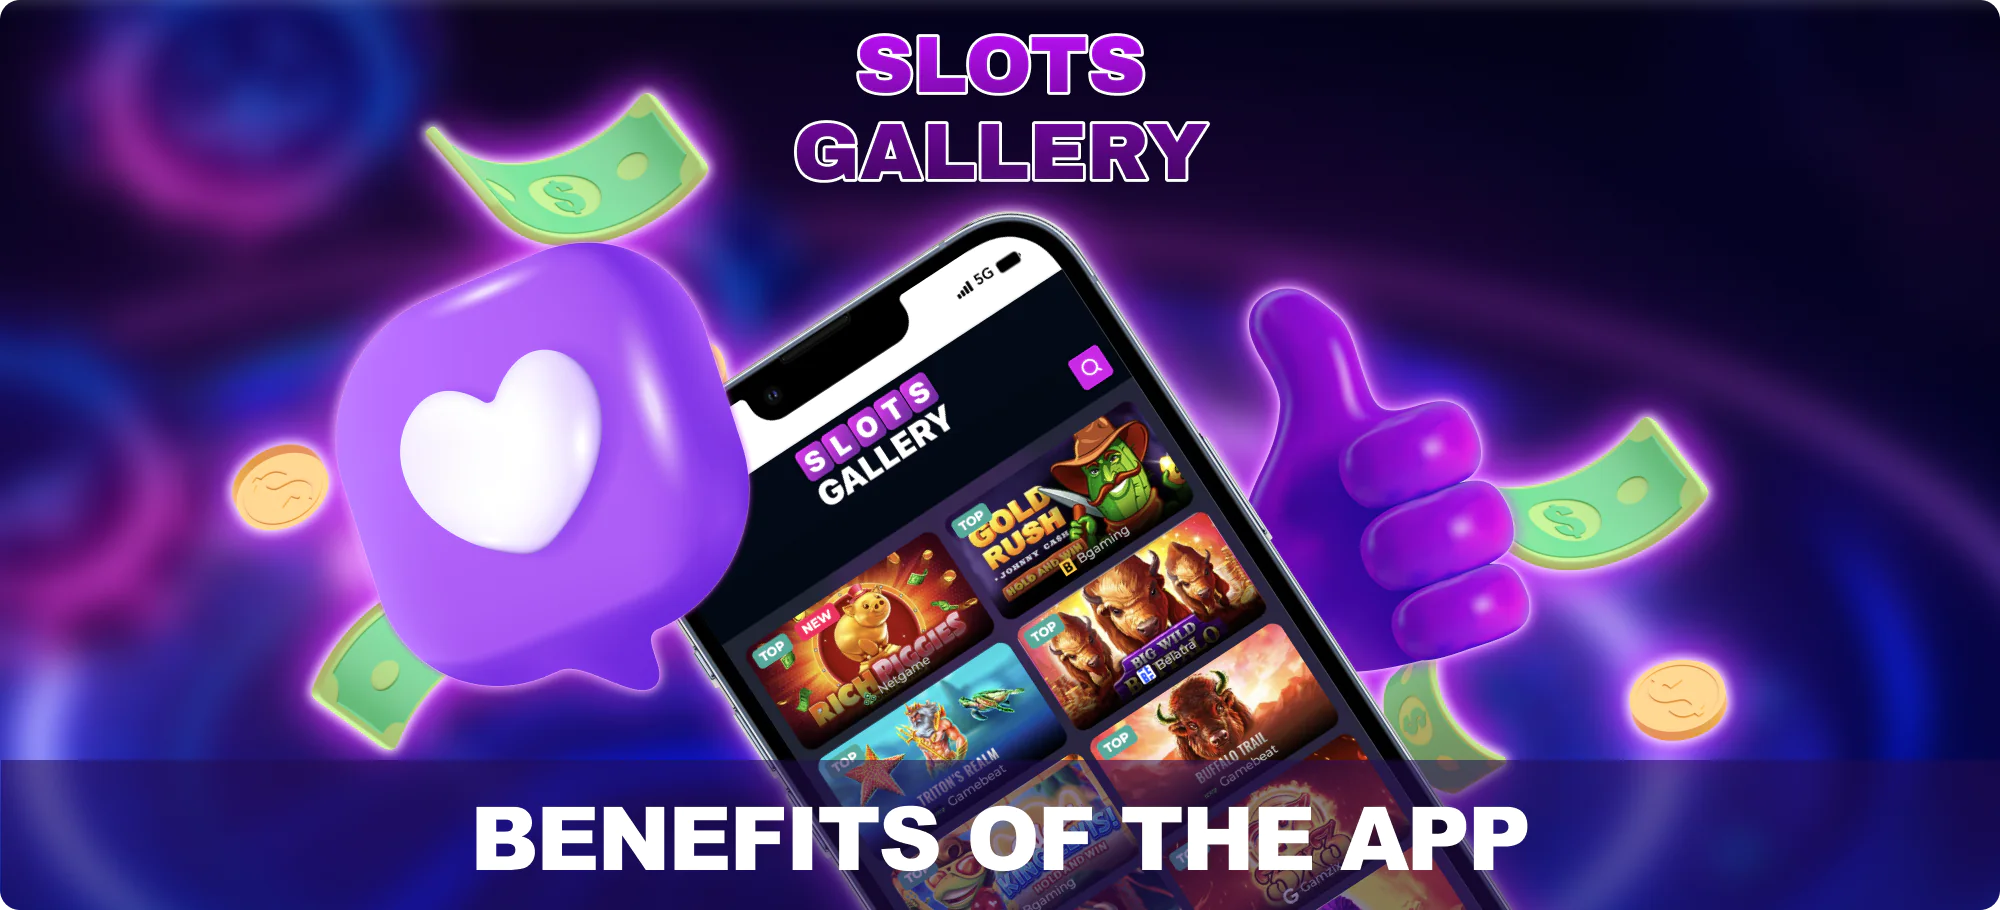 Slots Gallery App and its Benefits for Australian players